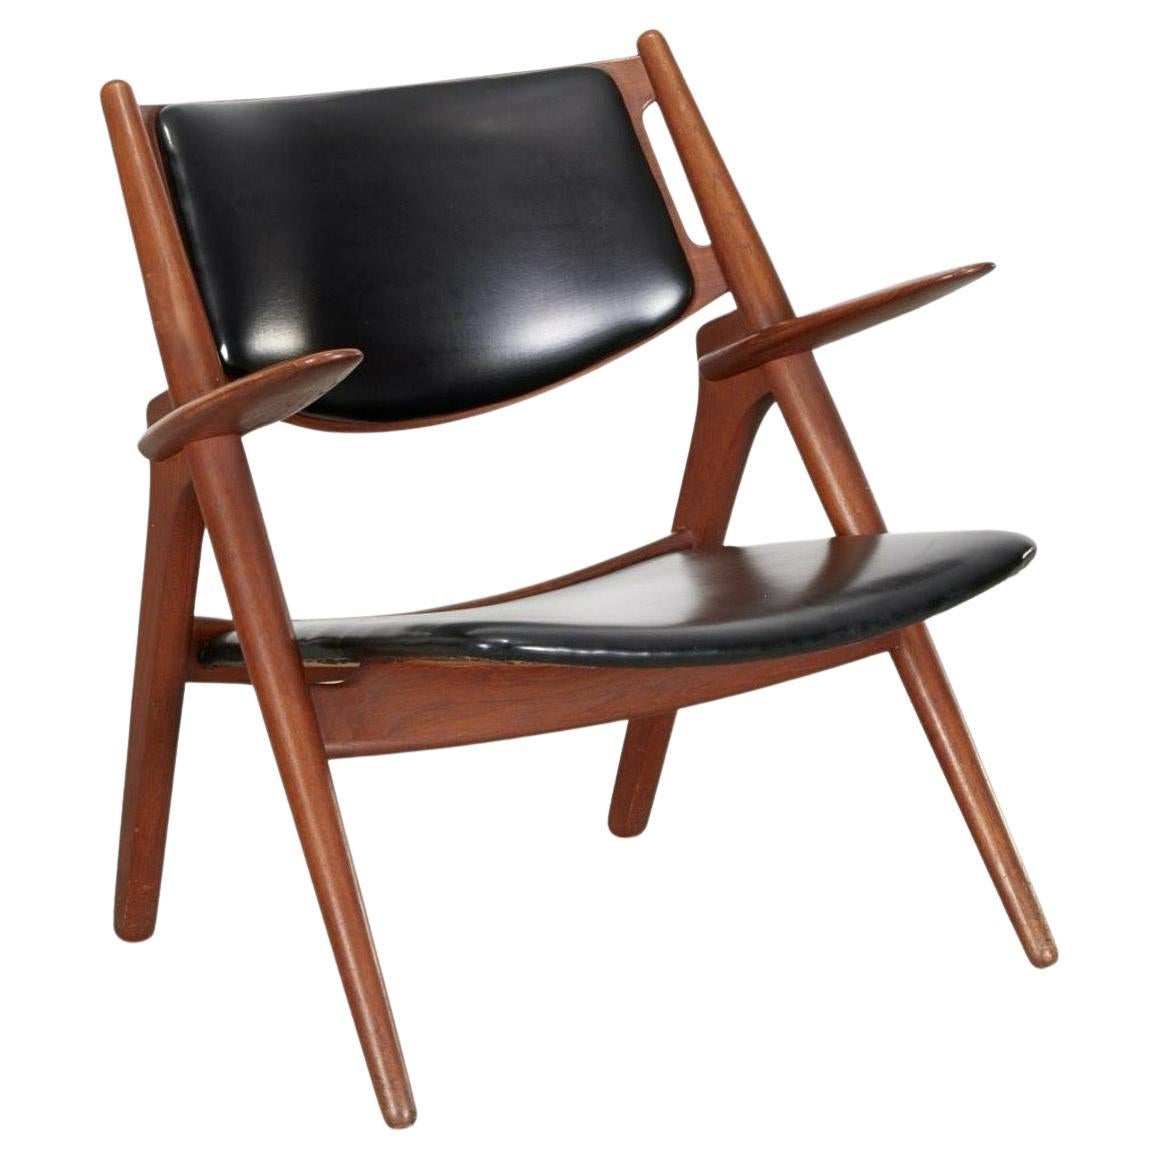 CH28 “Sawbuck” Chair in Teak Wood and Leather by Hans Wegner for Carl Hansen For Sale